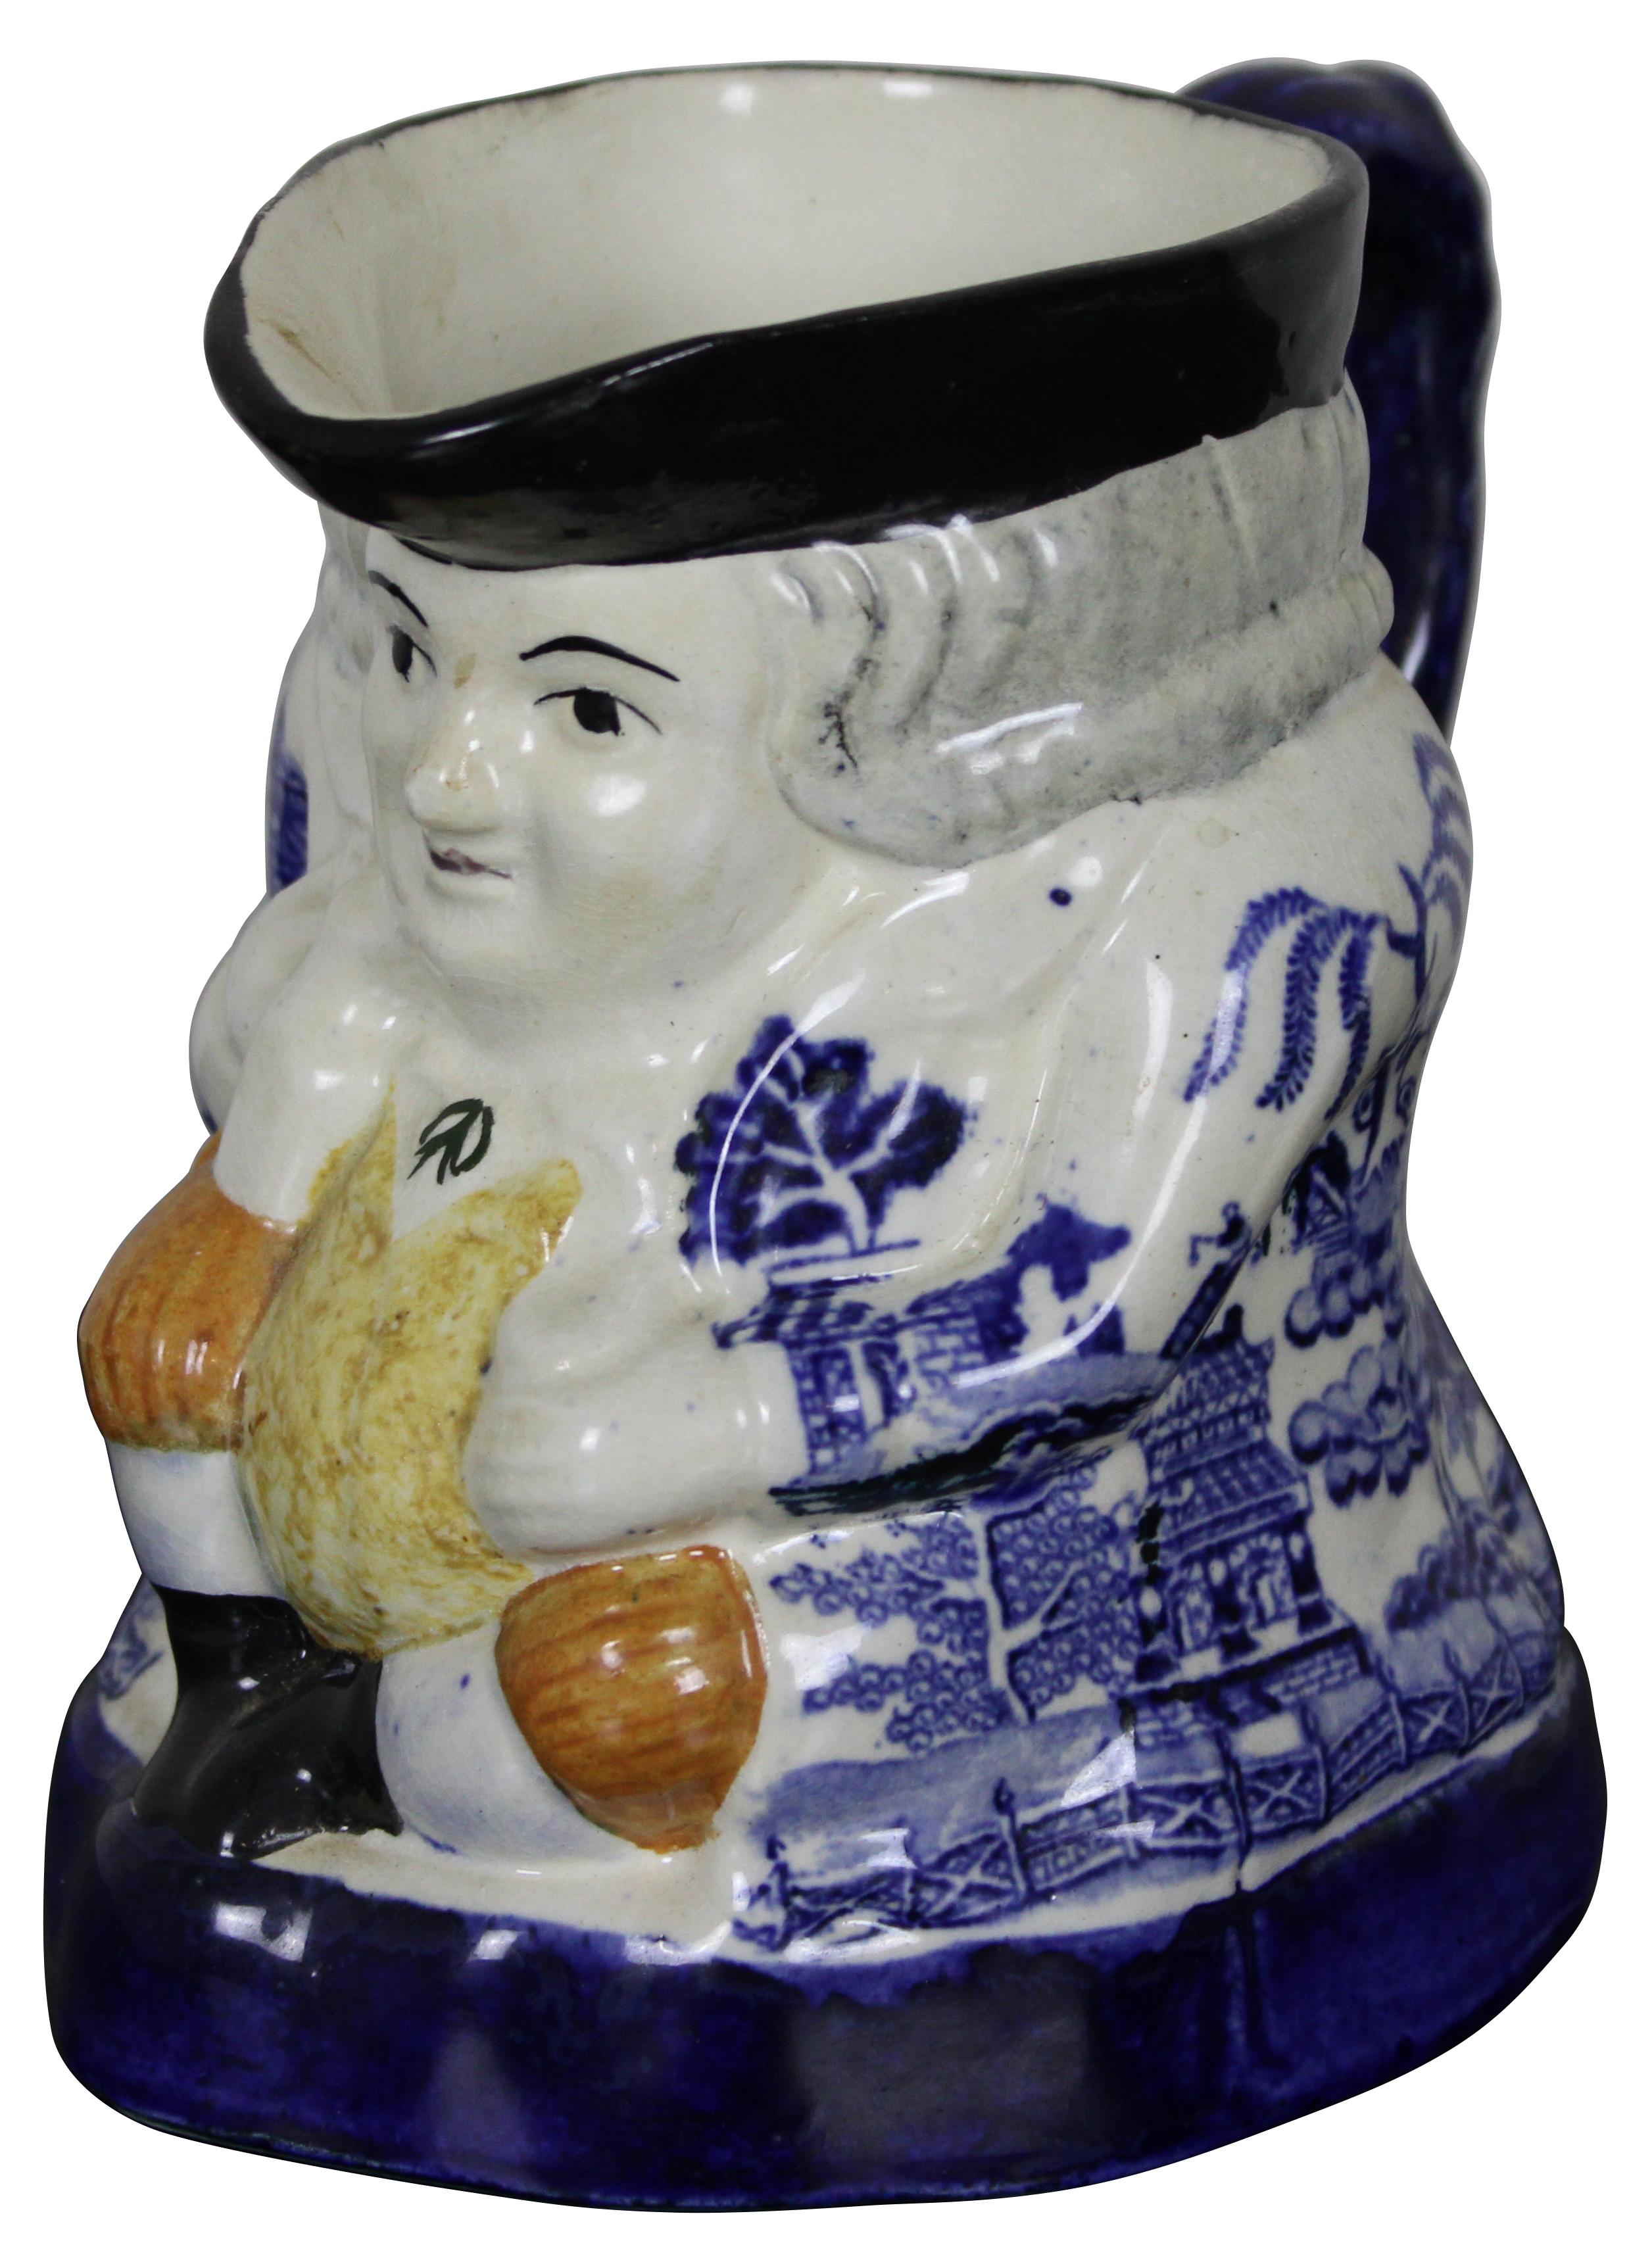 Antique turn of the century Old Staffordshire rare pottery toby jug in the shape of a colonial Englishman holding a cup and pitcher, and decorated with a chinoiserie blue willow pattern around the sides. Measure: 6